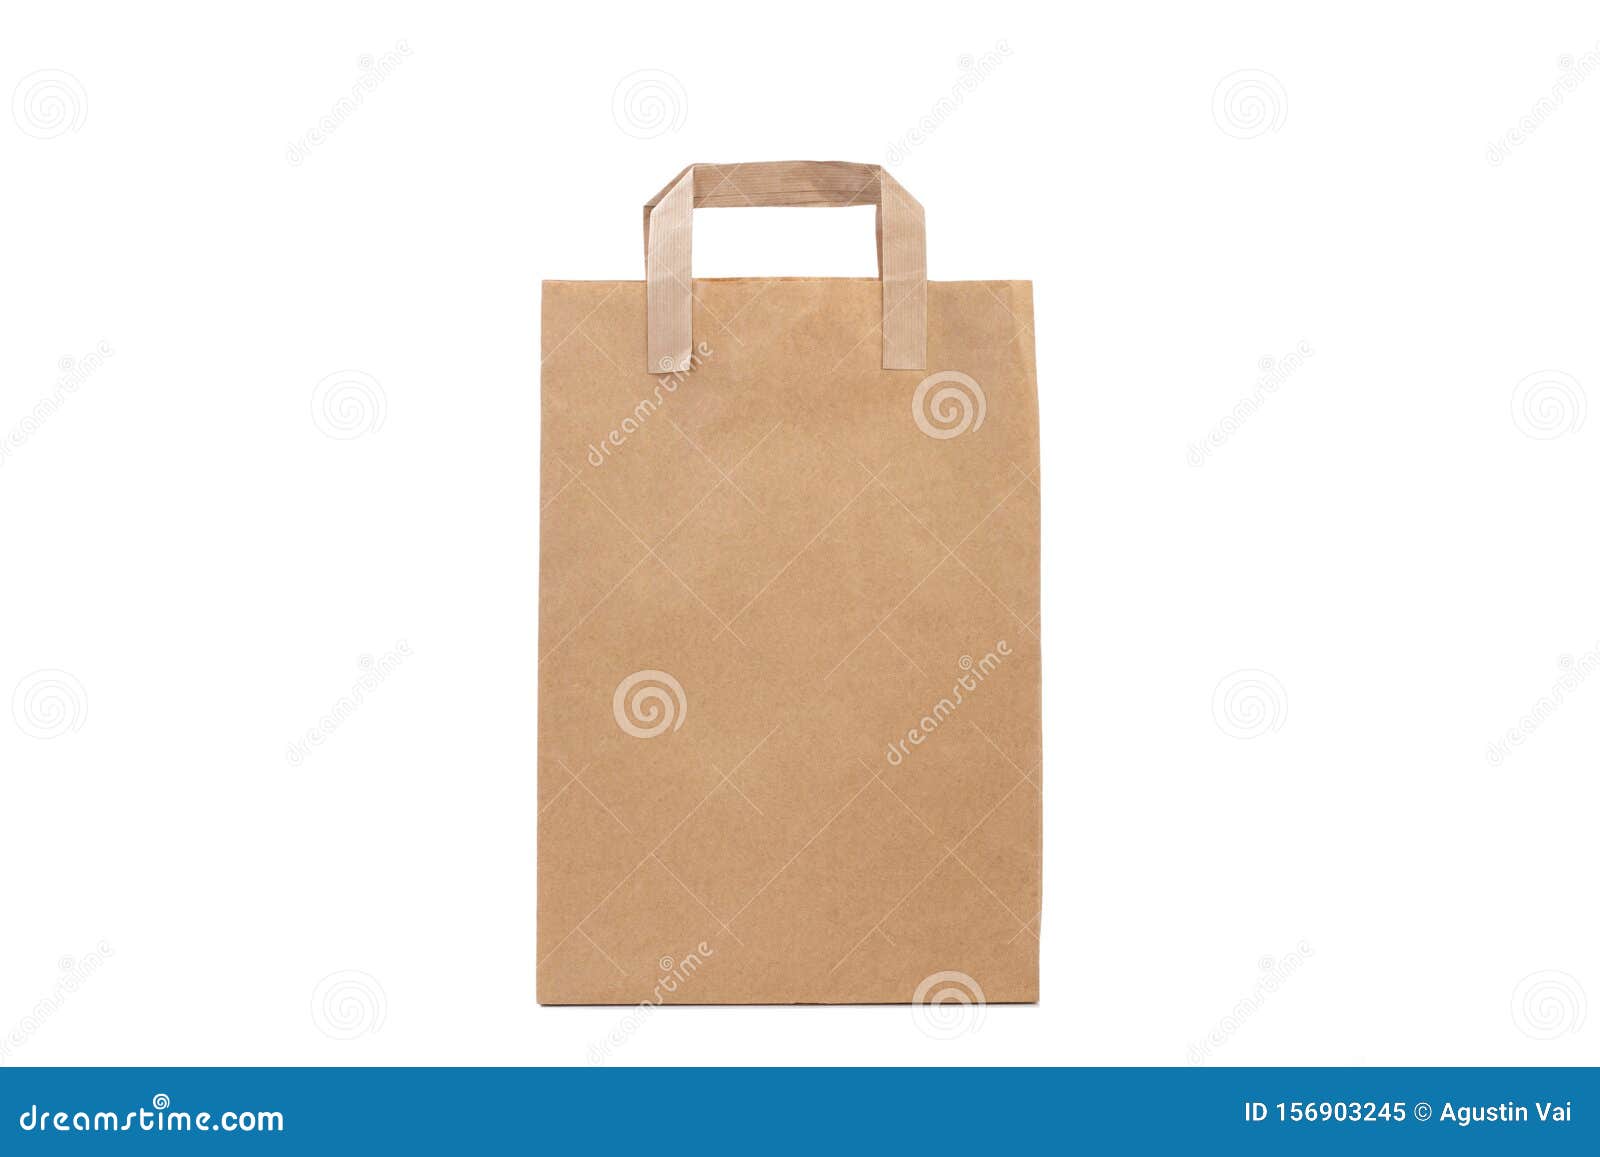 A Brown Paper Gift Bag with Handles Stock Image - Image of white, green ...